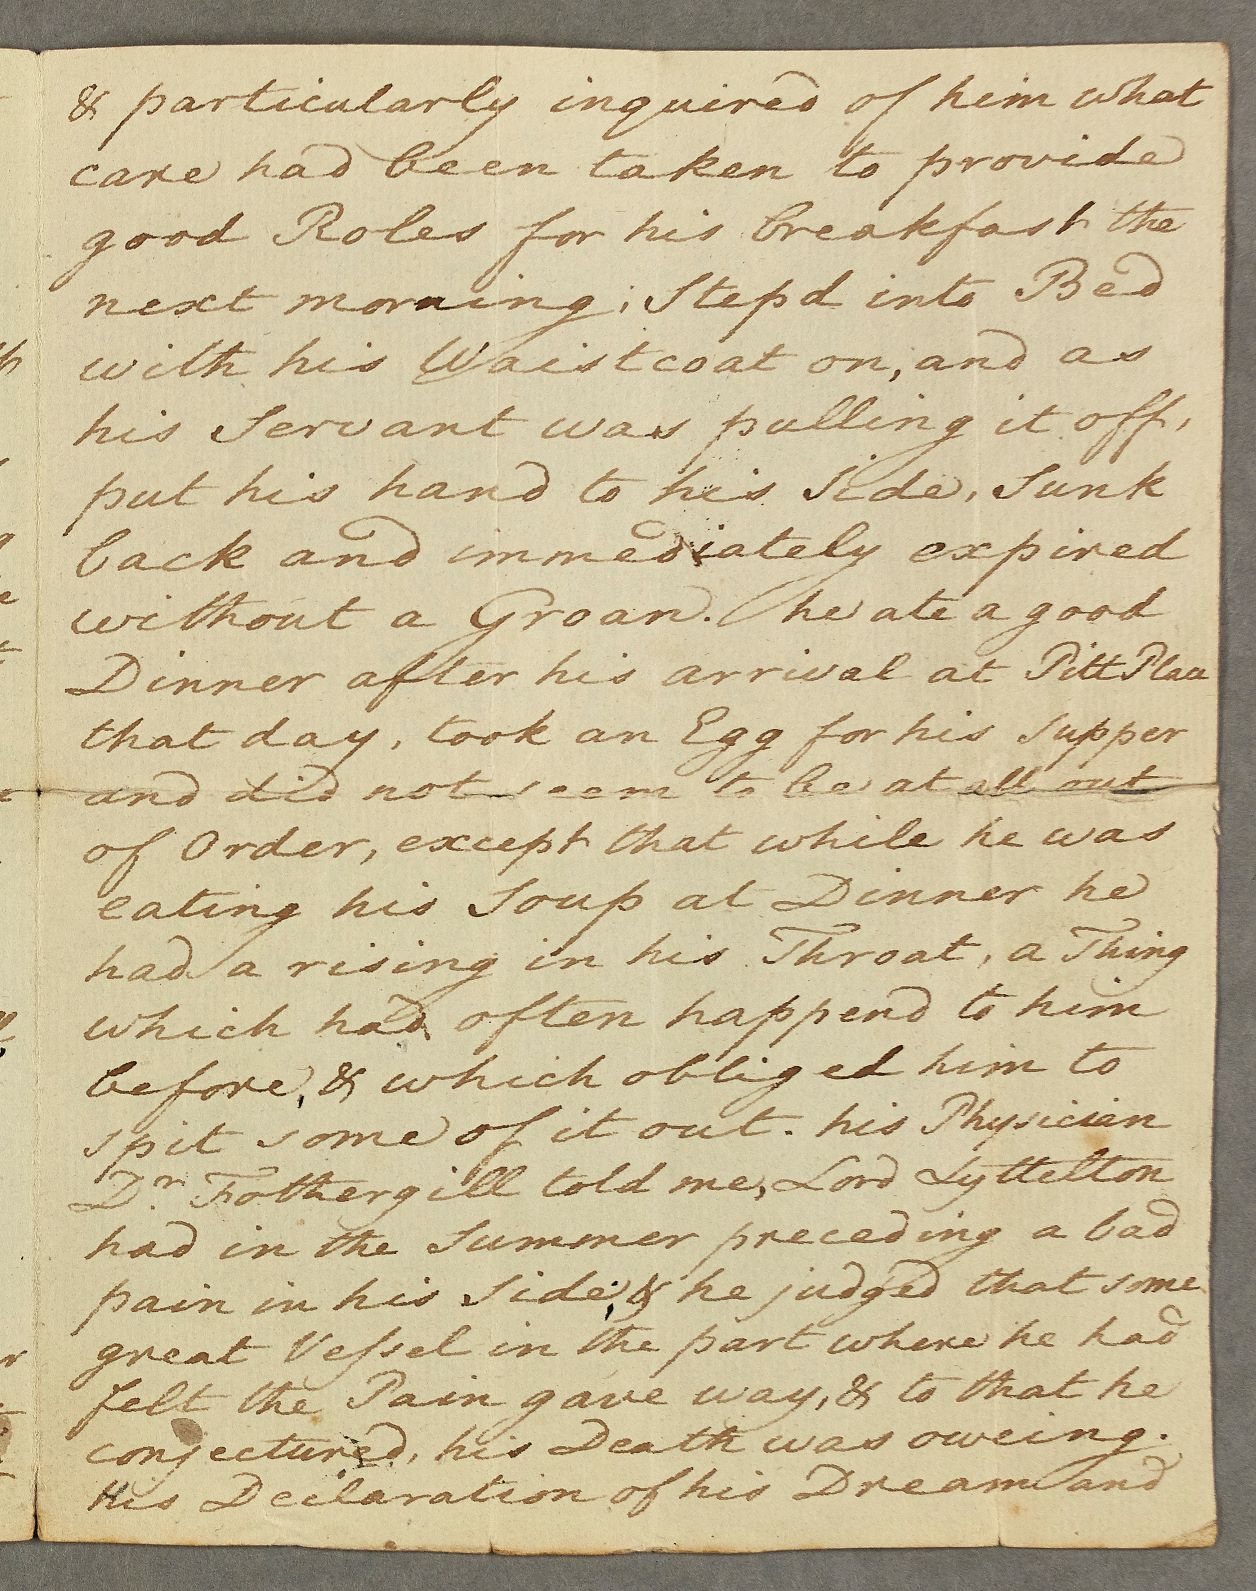 Page from Lord Westcote’s account describing Lord Lyttelton’s demise